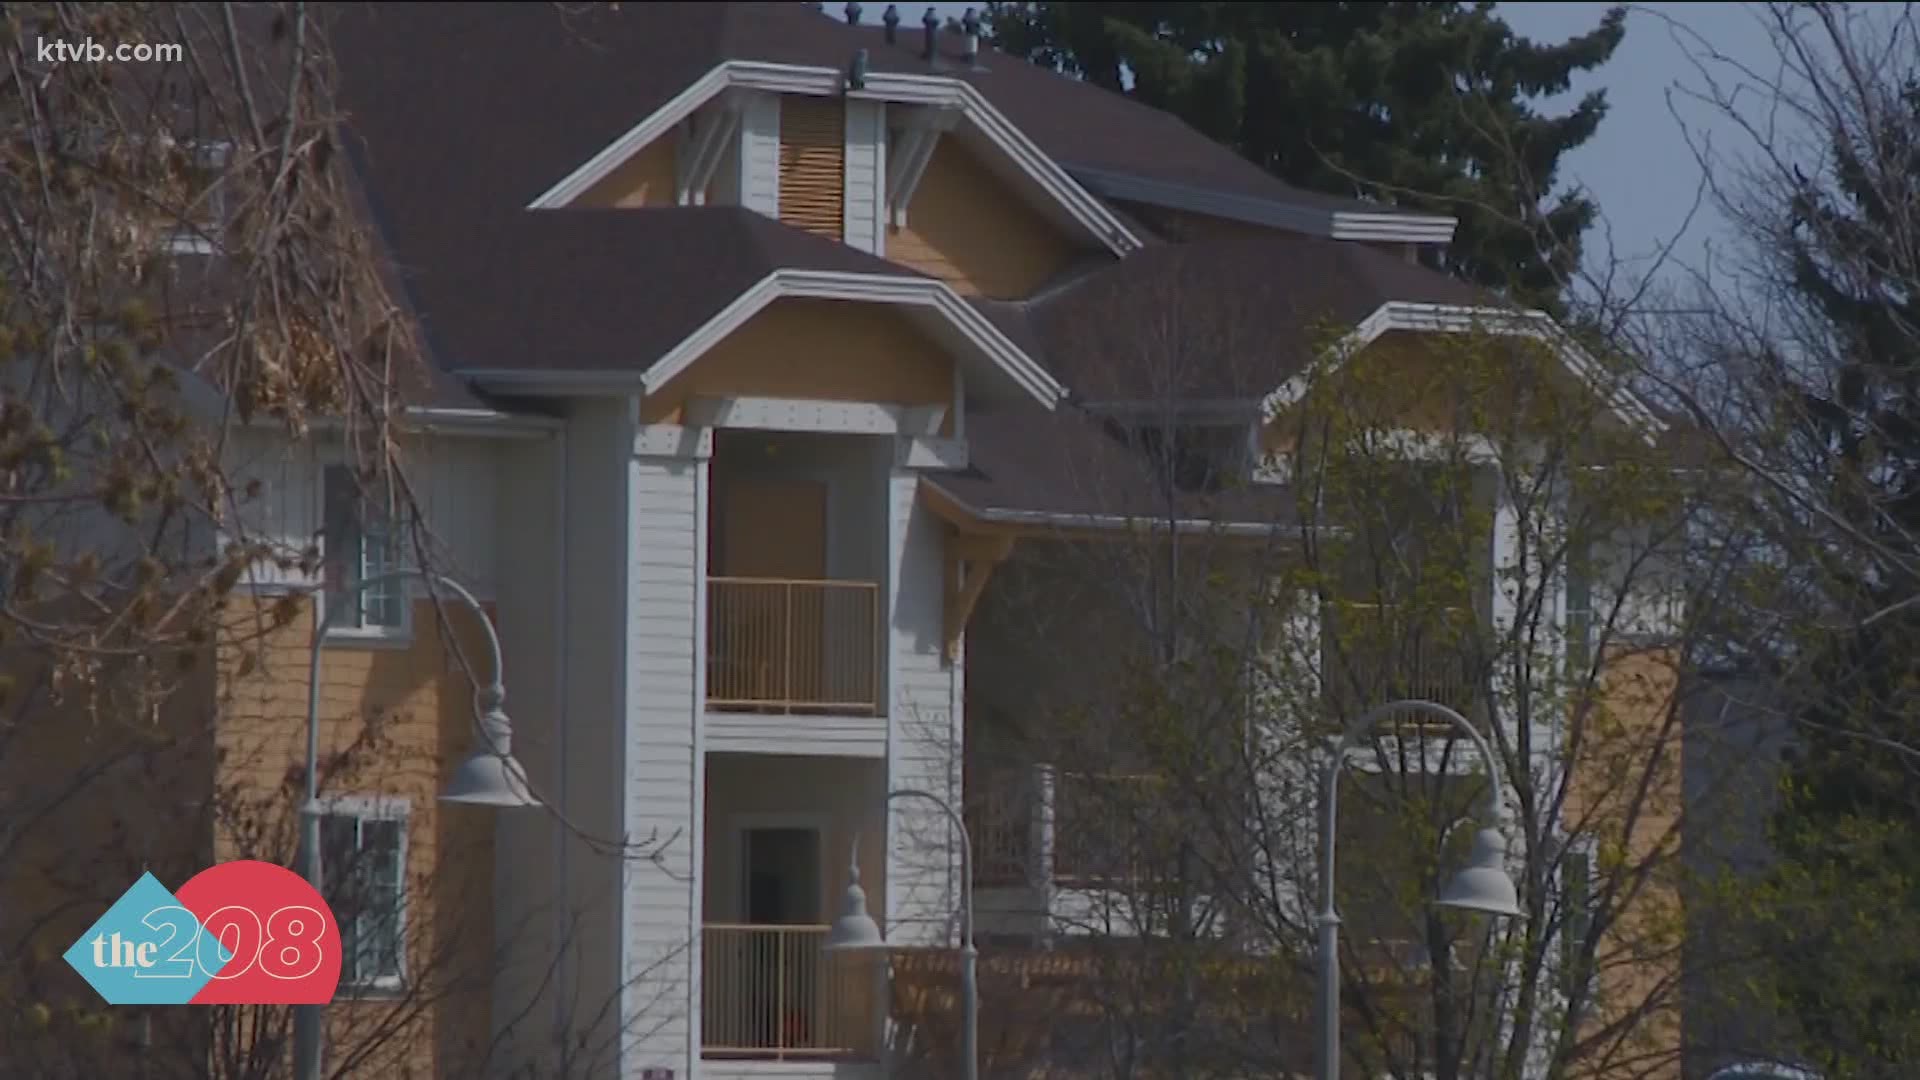 The Idaho Housing and Finance Association has a program that it wants more people to take advantage of.